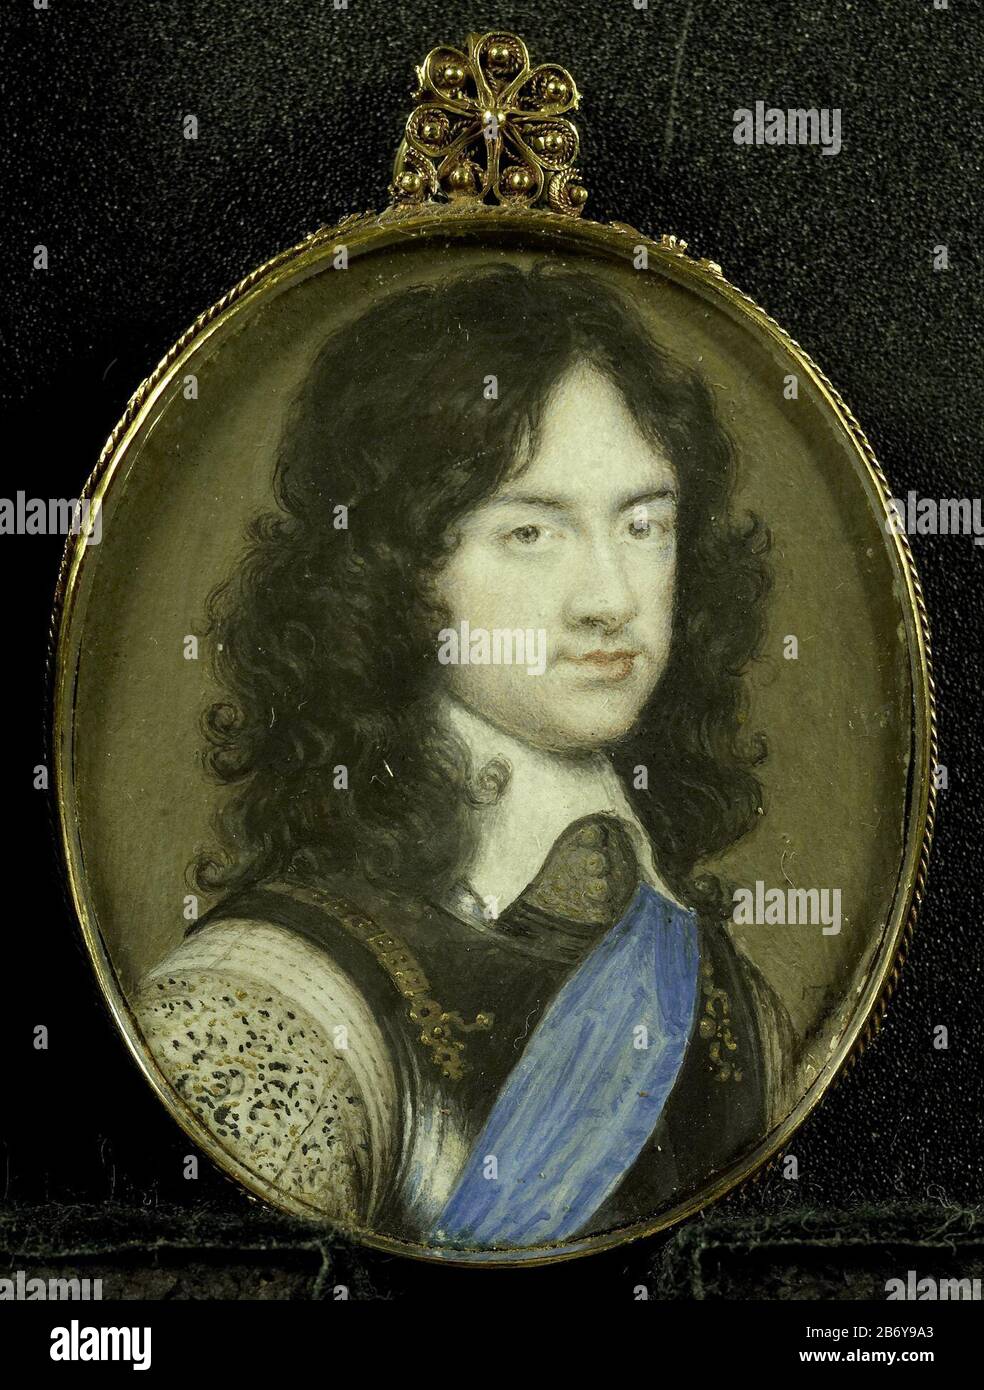 Karel Stuart (1630-85), prins van Wales De latere koning Karel II van Engeland, SK-A-4369  Charles Stuart (1630-85), Prince of Wales. The later King Charles II of England Property Type: miniature (painting) Item number: SK-A-4369 Inscriptions / Brands: signature and date bottom right: 'NThach F165 ..' Description: Portrait of Charles Stuart (1630-85), Prince of Wales. The later King Charles II of England. Bust right in armor. In an original by Adriaen Hanneman. Part of the collection portretminiaturen. Manufacturer : painter: Nathaniel Thachschilder: Adriaen Hanneman (copy to) Date: 1650 - 165 Stock Photo